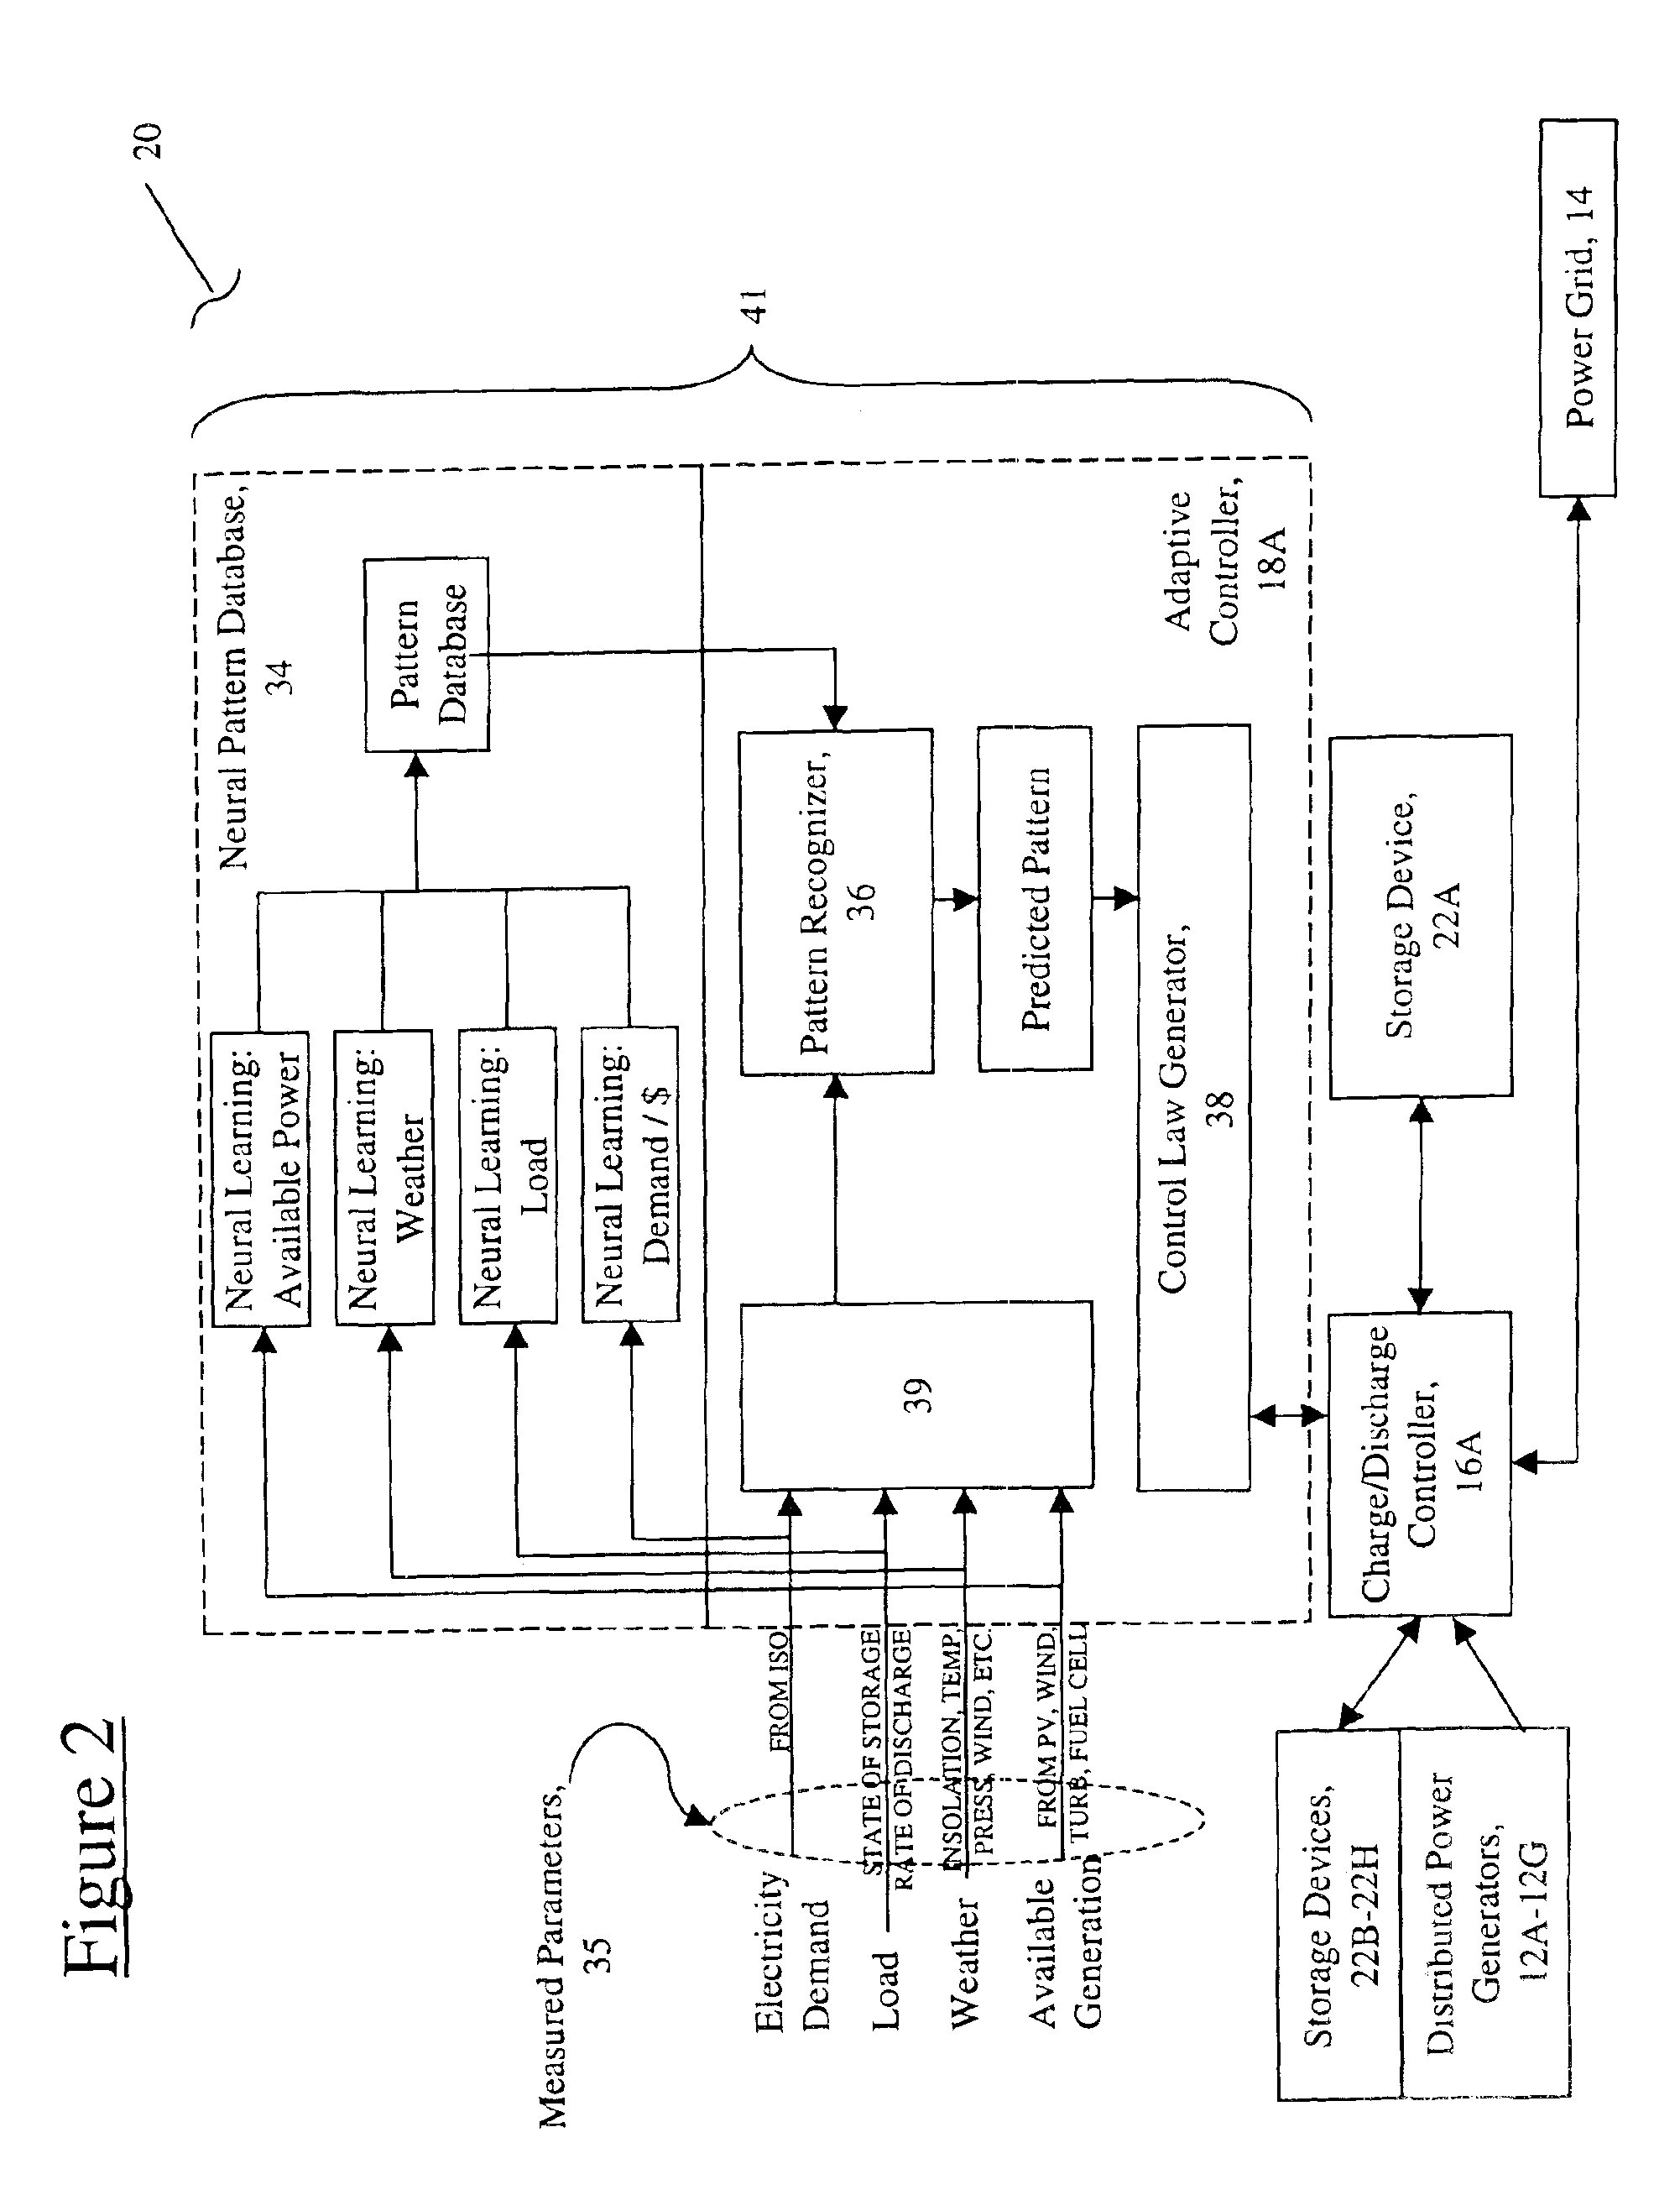 Distributed energy neural network integration system